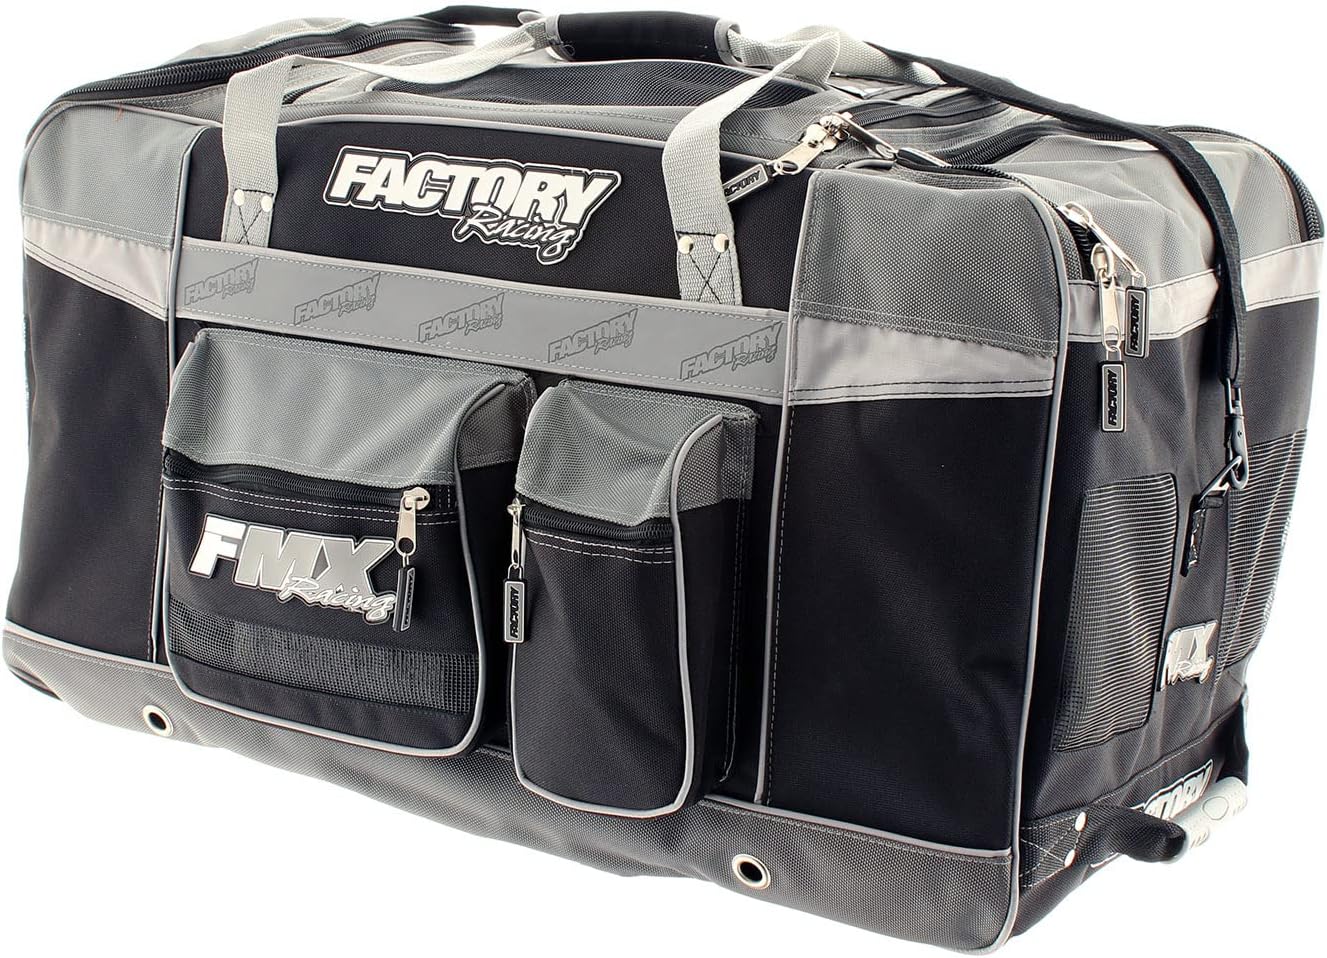 Factory FMX Motocross Gear Bag X-Large Gray - Click Image to Close